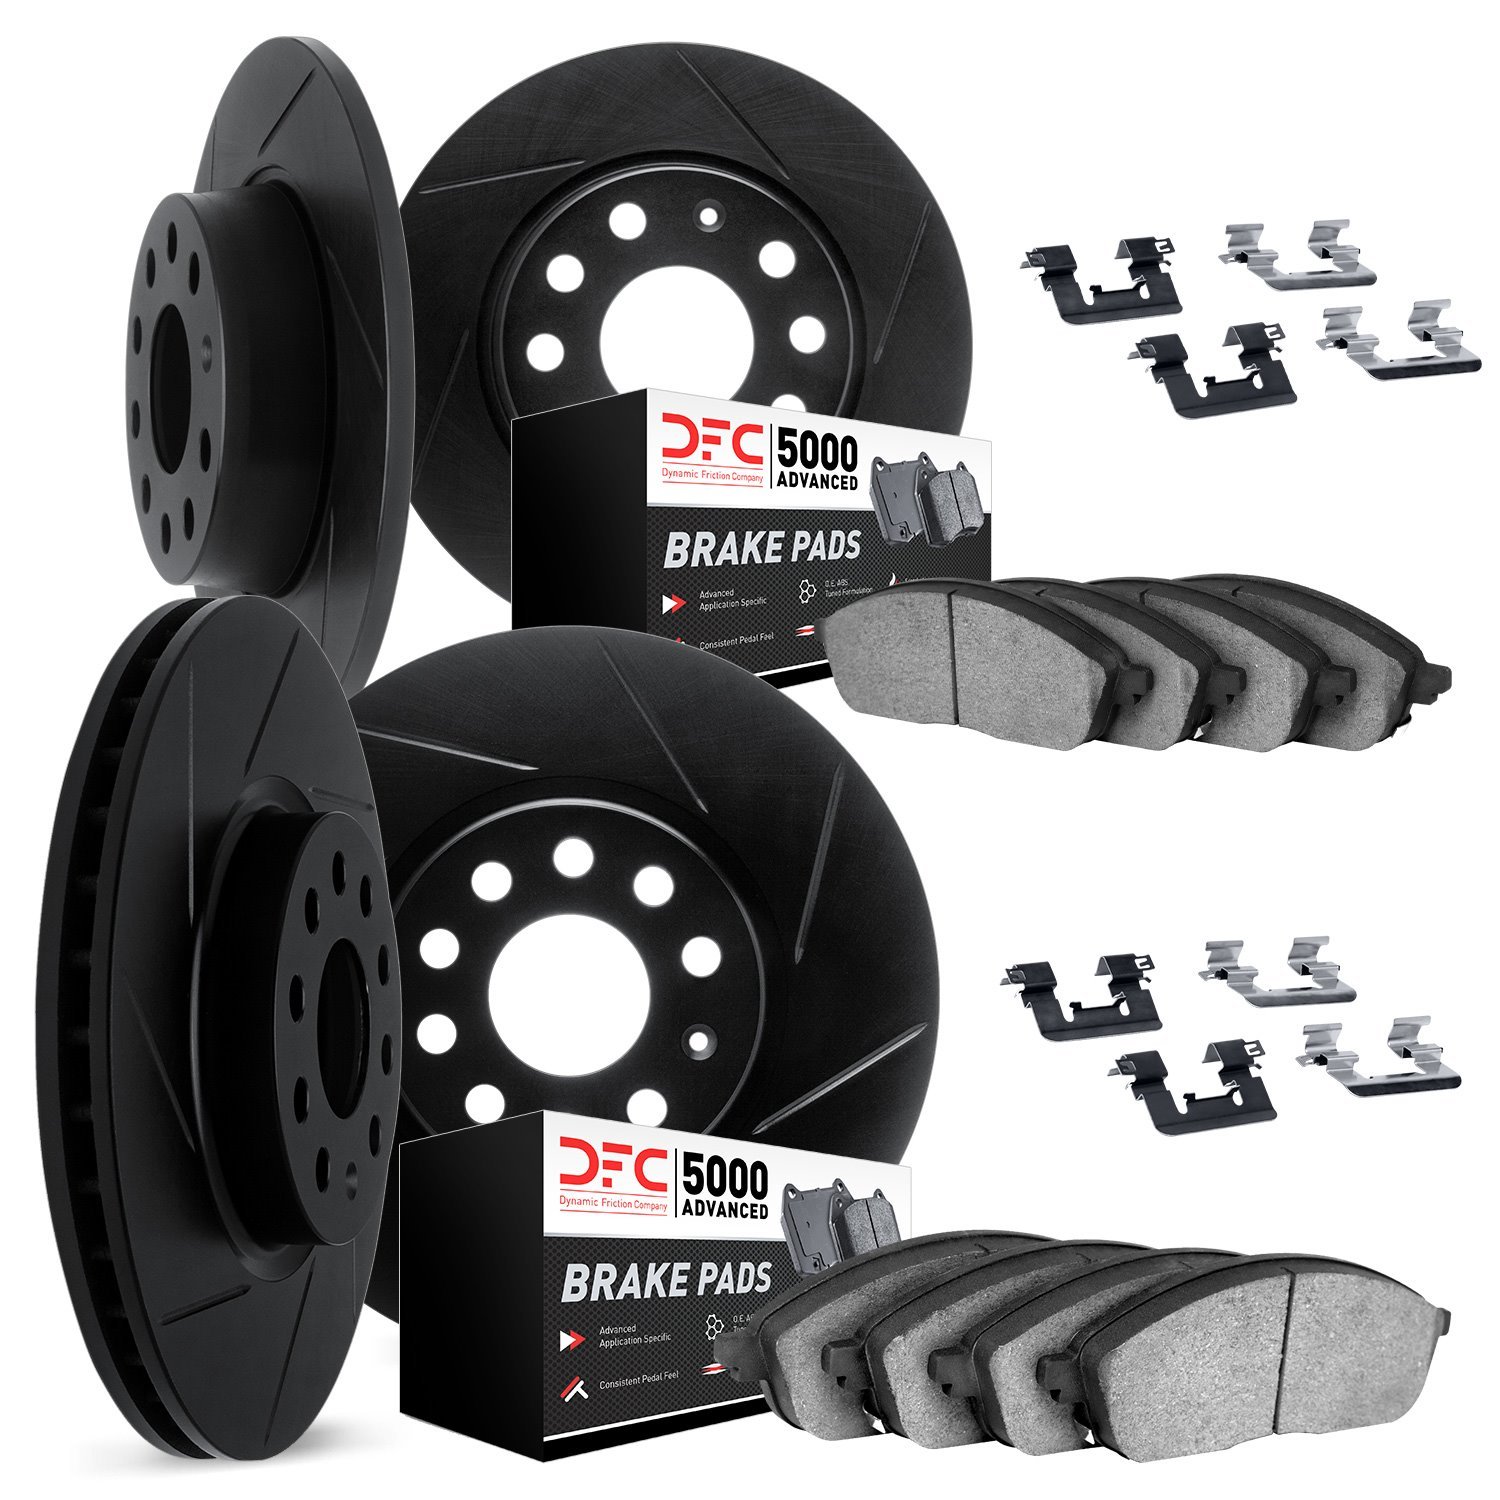 3514-58019 Slotted Brake Rotors w/5000 Advanced Brake Pads Kit & Hardware [Black], 2014-2016 Acura/Honda, Position: Front and Re